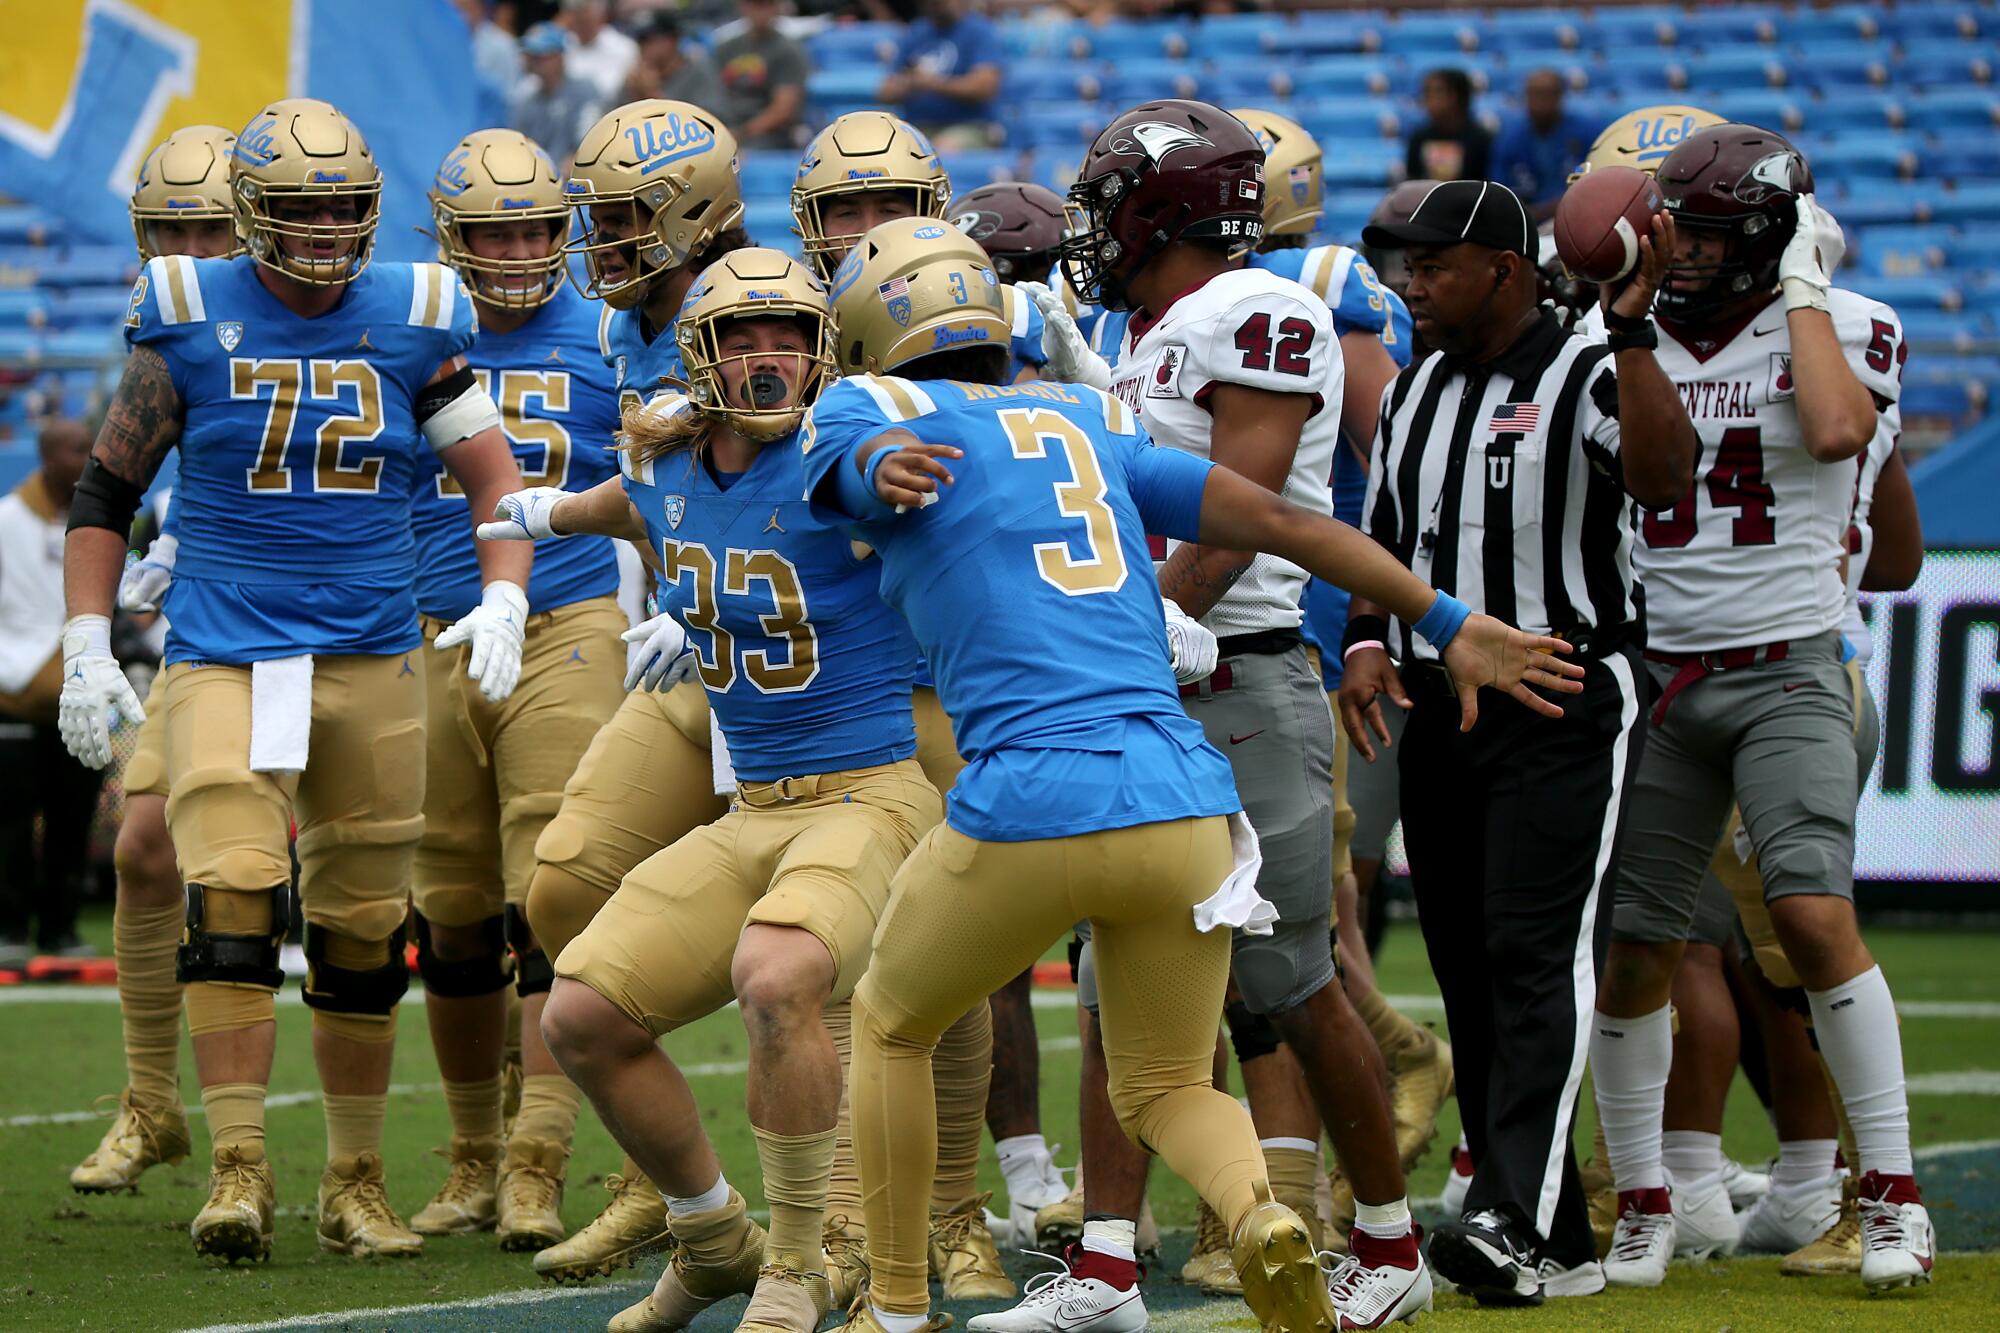 UCLA running back Carson Steele prepares to jump in the air with quarterback Dante Moore while teammates watch.